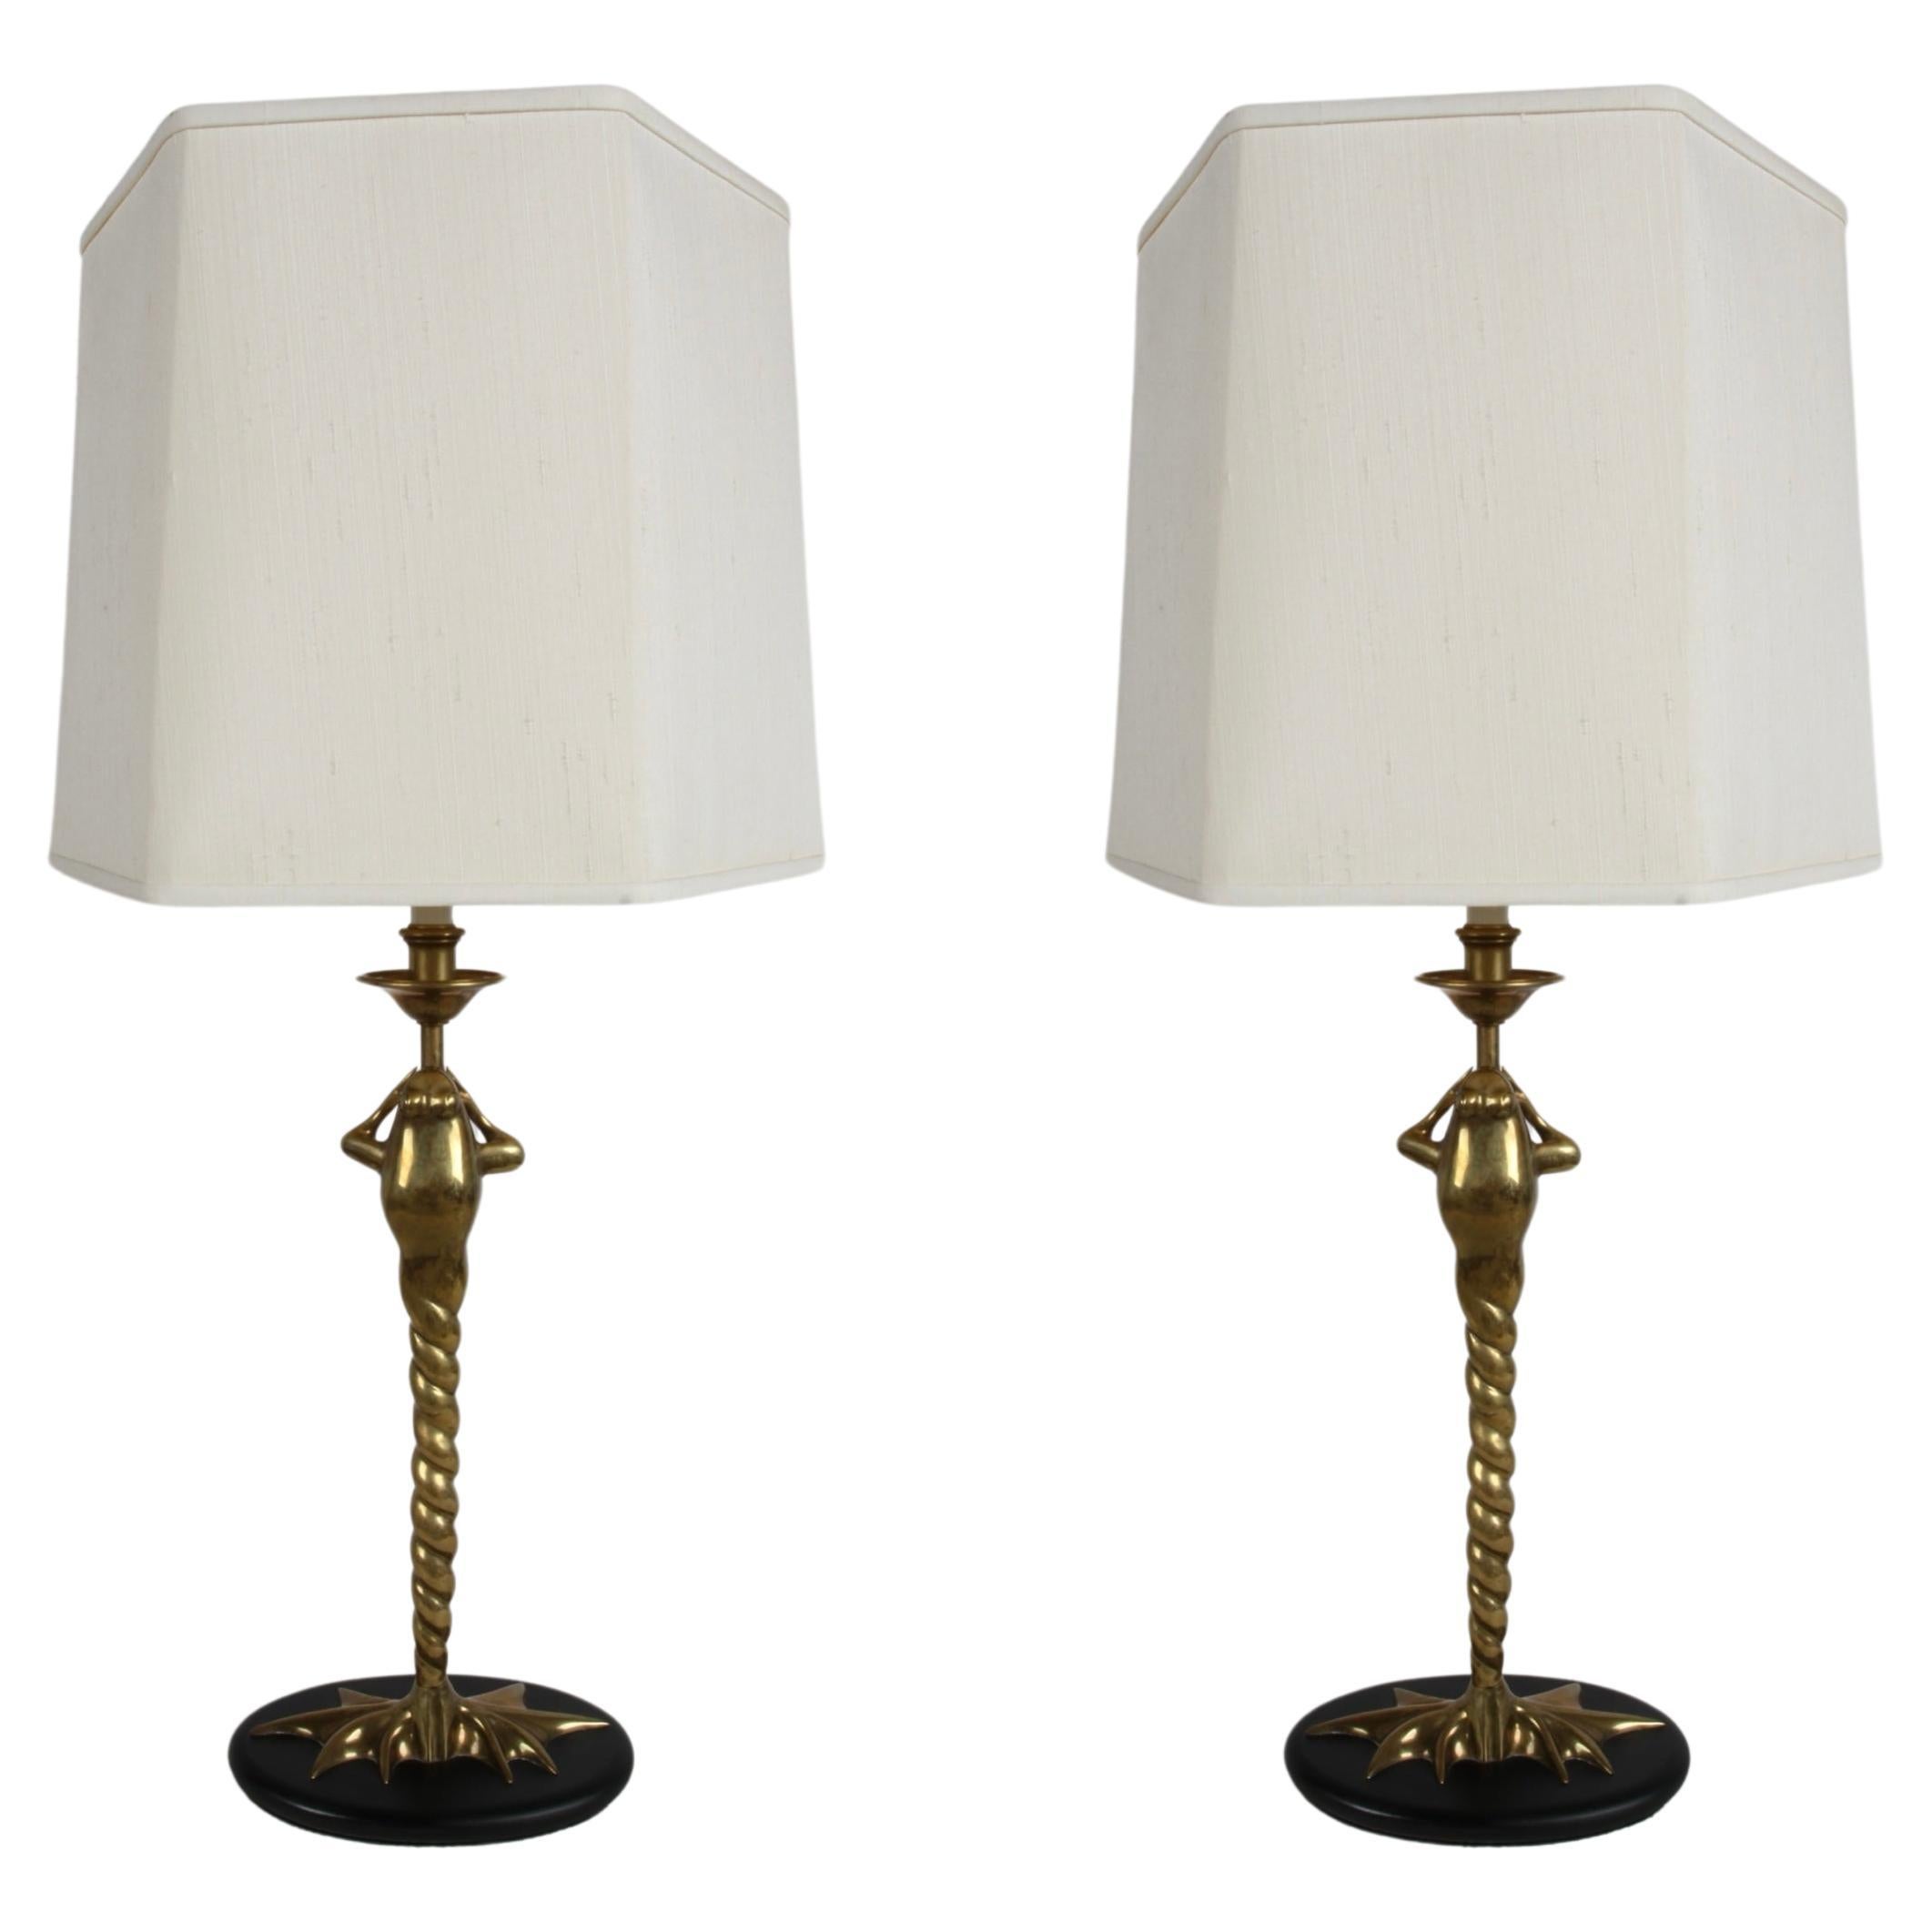 Pair of 1970s Solid Brass Frog with Twisted Legs Table Lamps by Chapman Lamp Co.